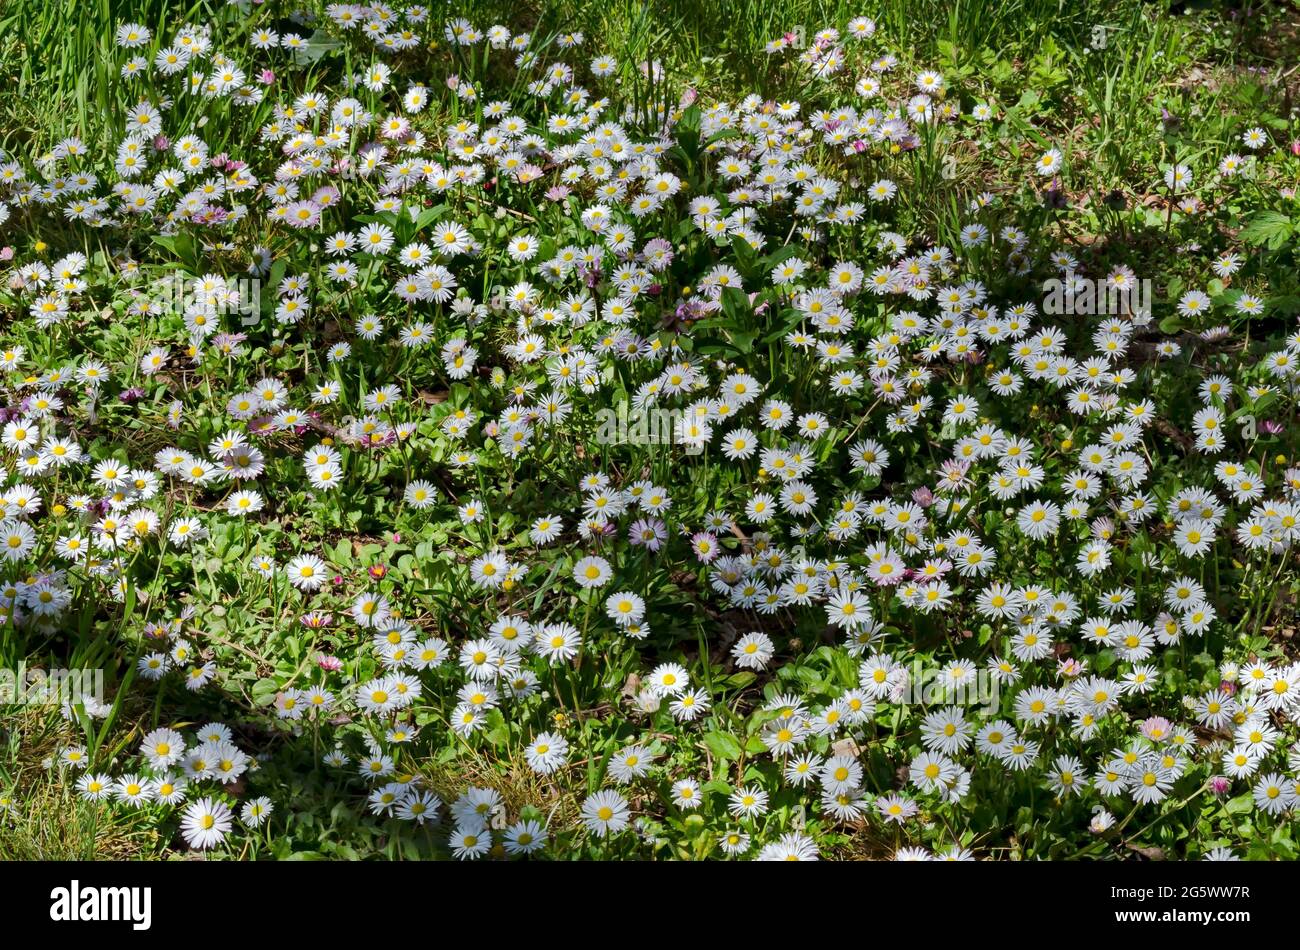 Meadow with fresh grass and blooming white daisies, Sofia, Bulgaria Stock Photo